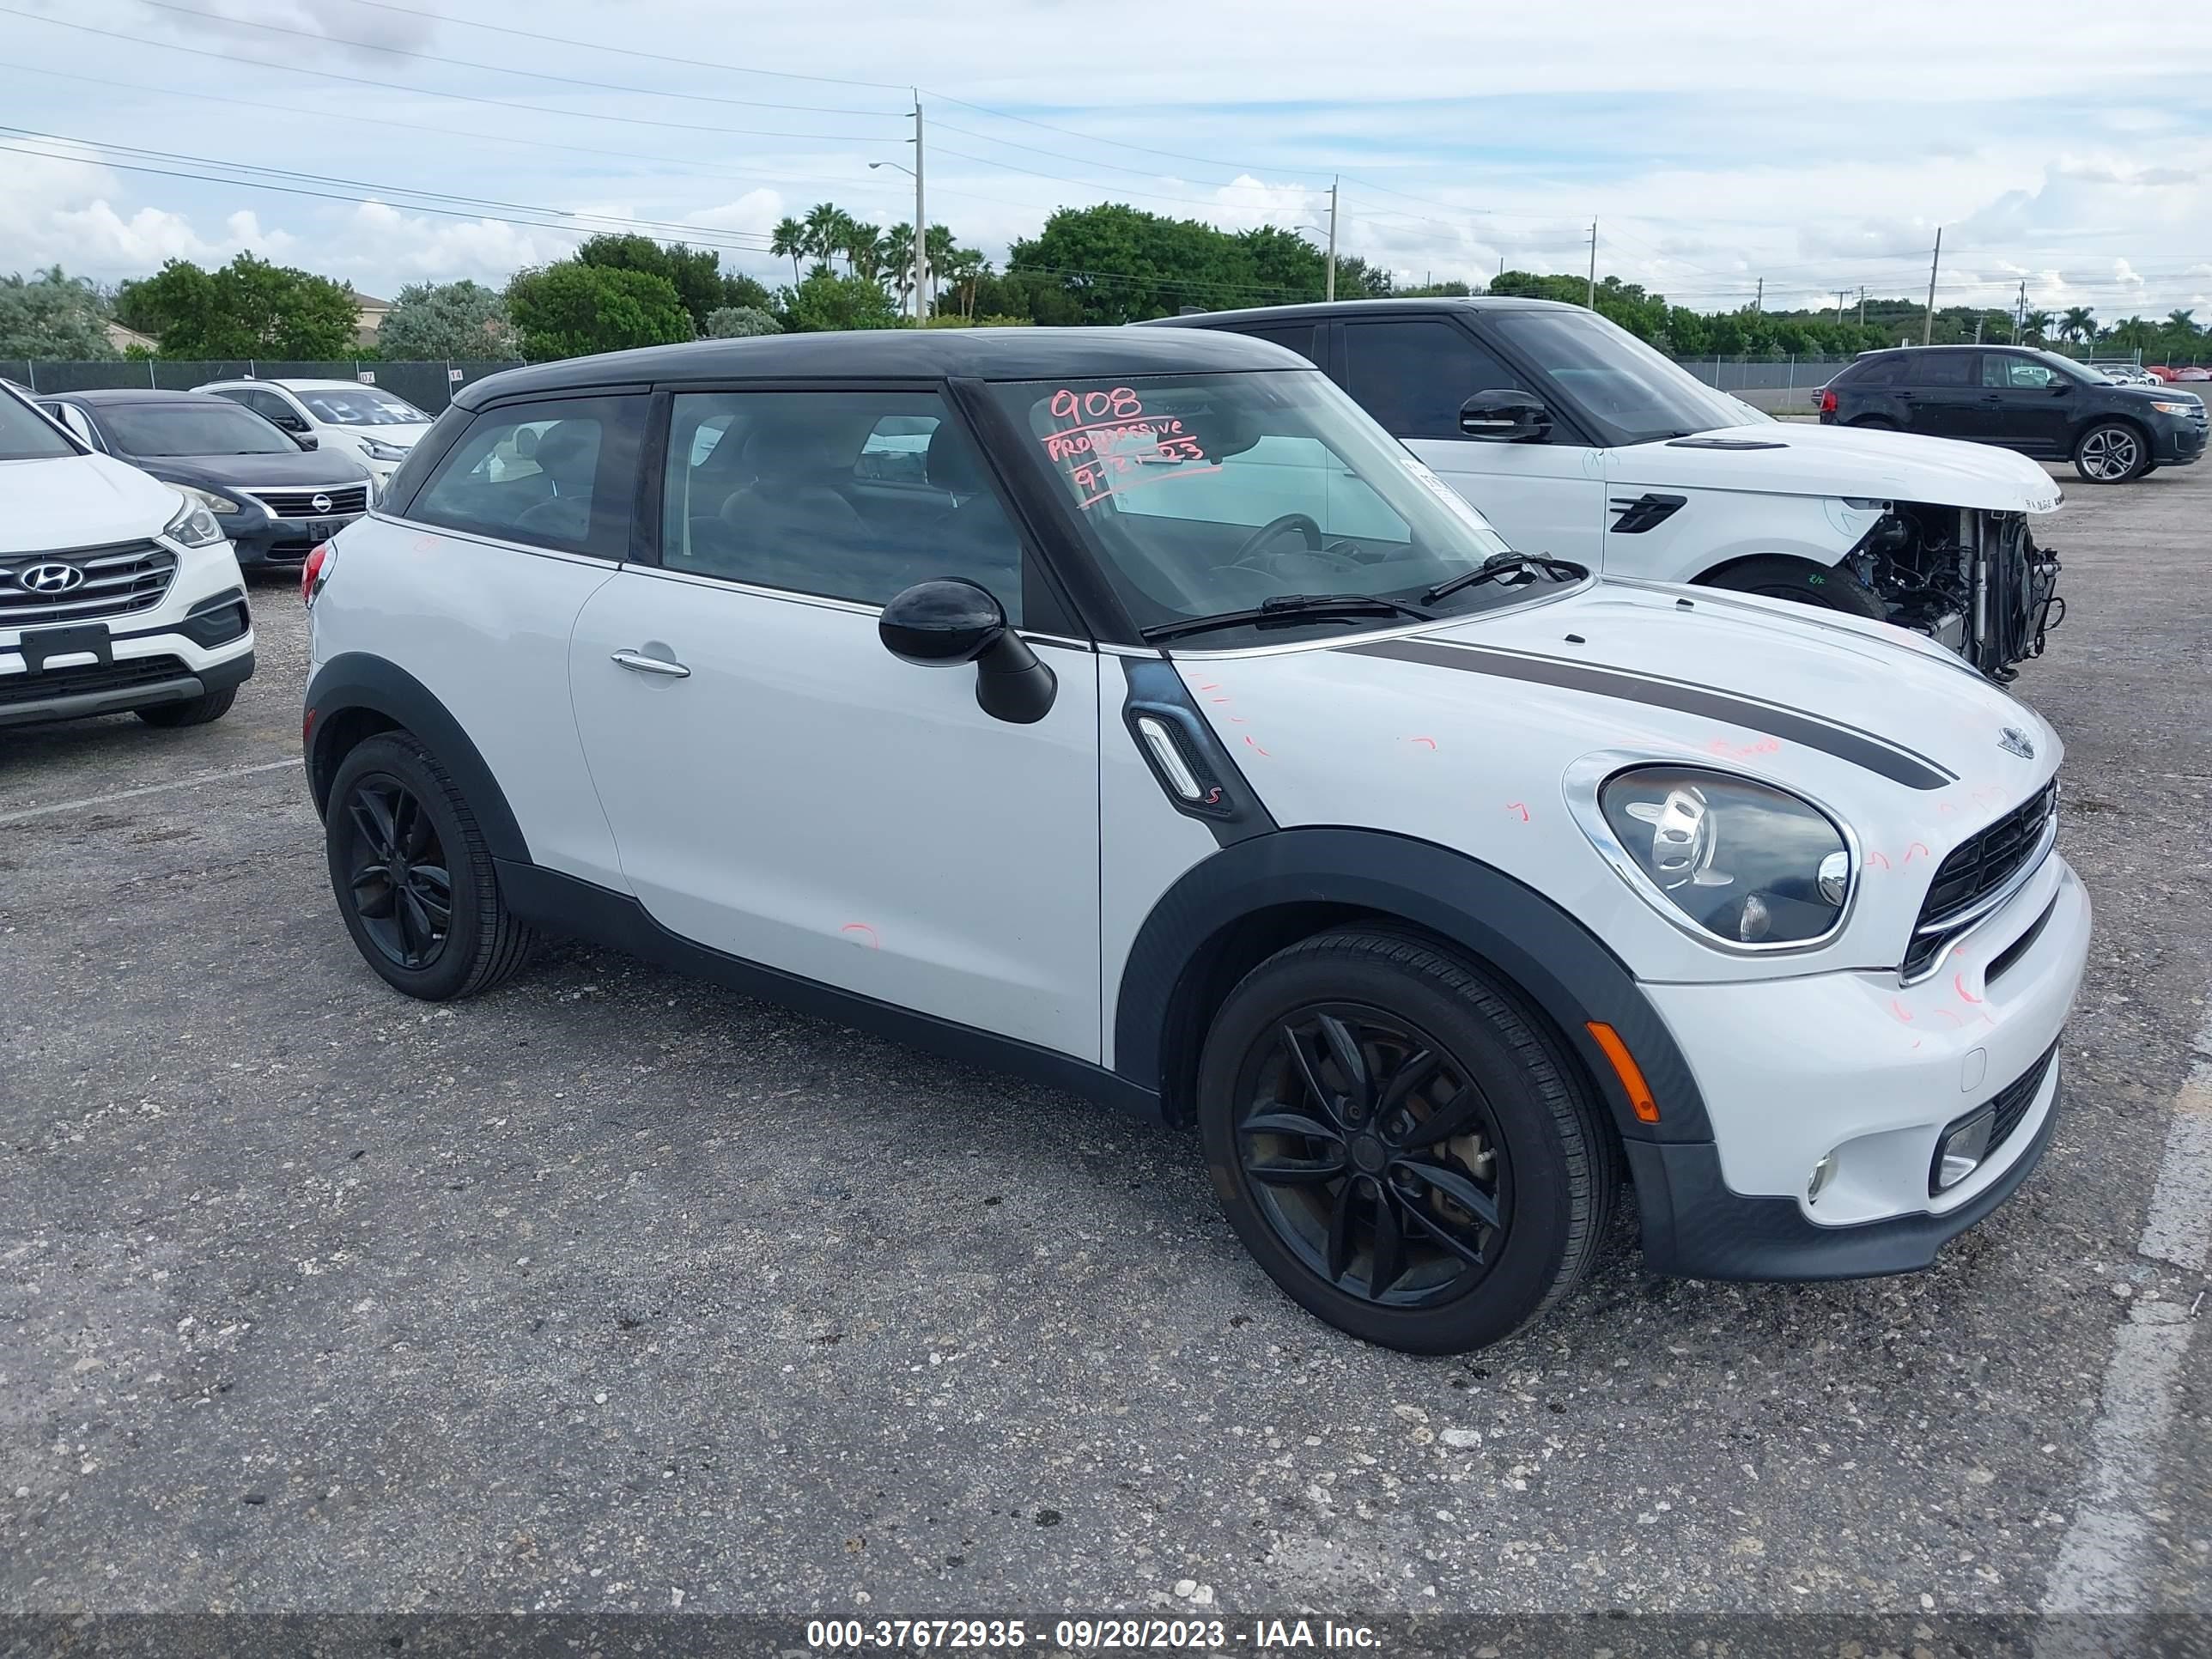 vin: WMWSS5C53FWS99865 WMWSS5C53FWS99865 2015 mini paceman 1600 for Sale in 33332, 6275 Sw 196Th Ave, Pembroke Pines, Florida, USA